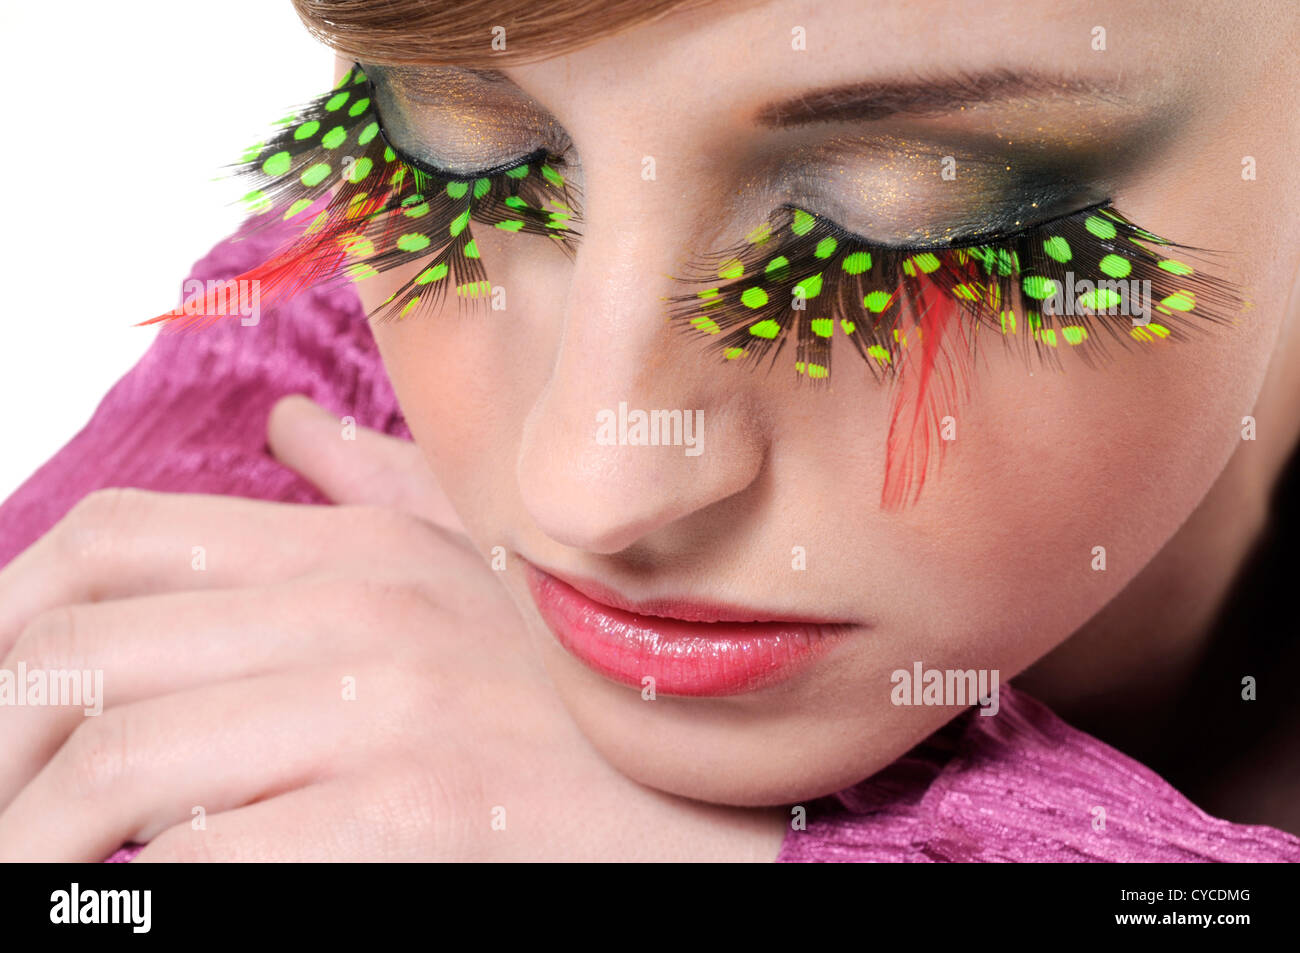 Woman with artificial eyelashes Stock Photo